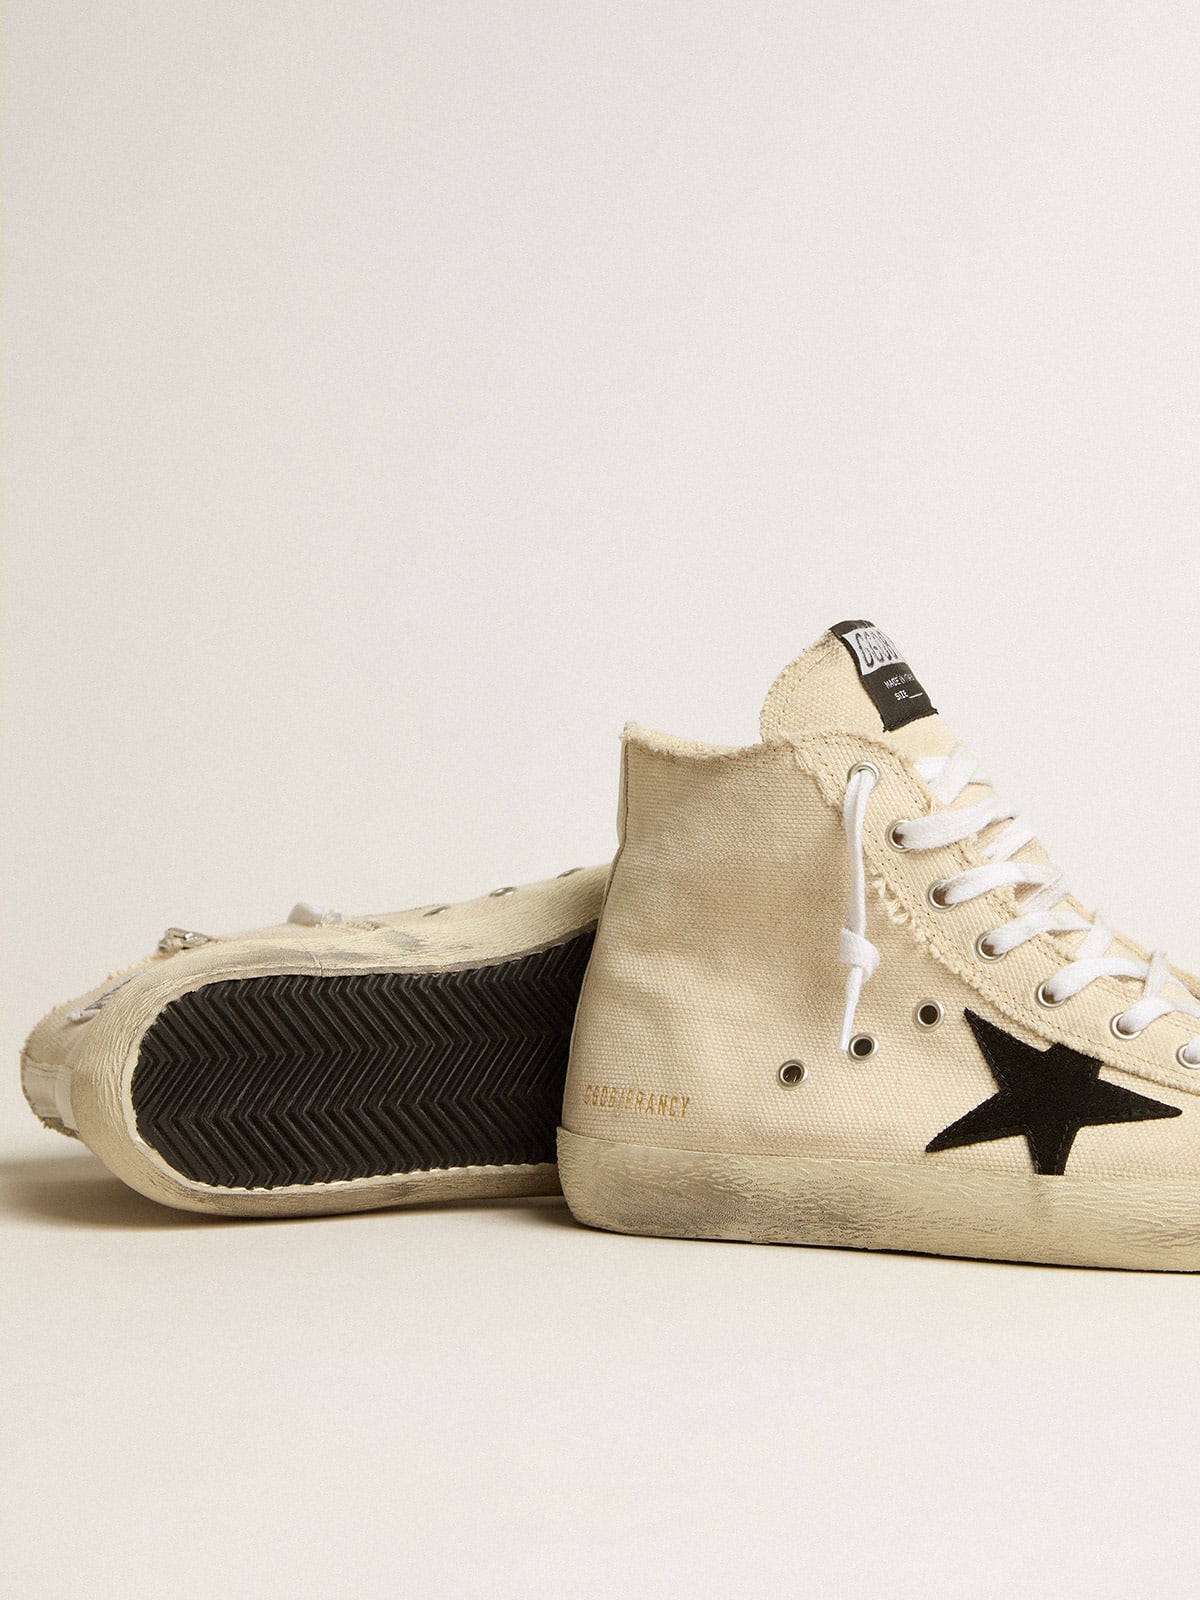 Golden Goose Francy Penstar in canvas with black suede star and leather ...